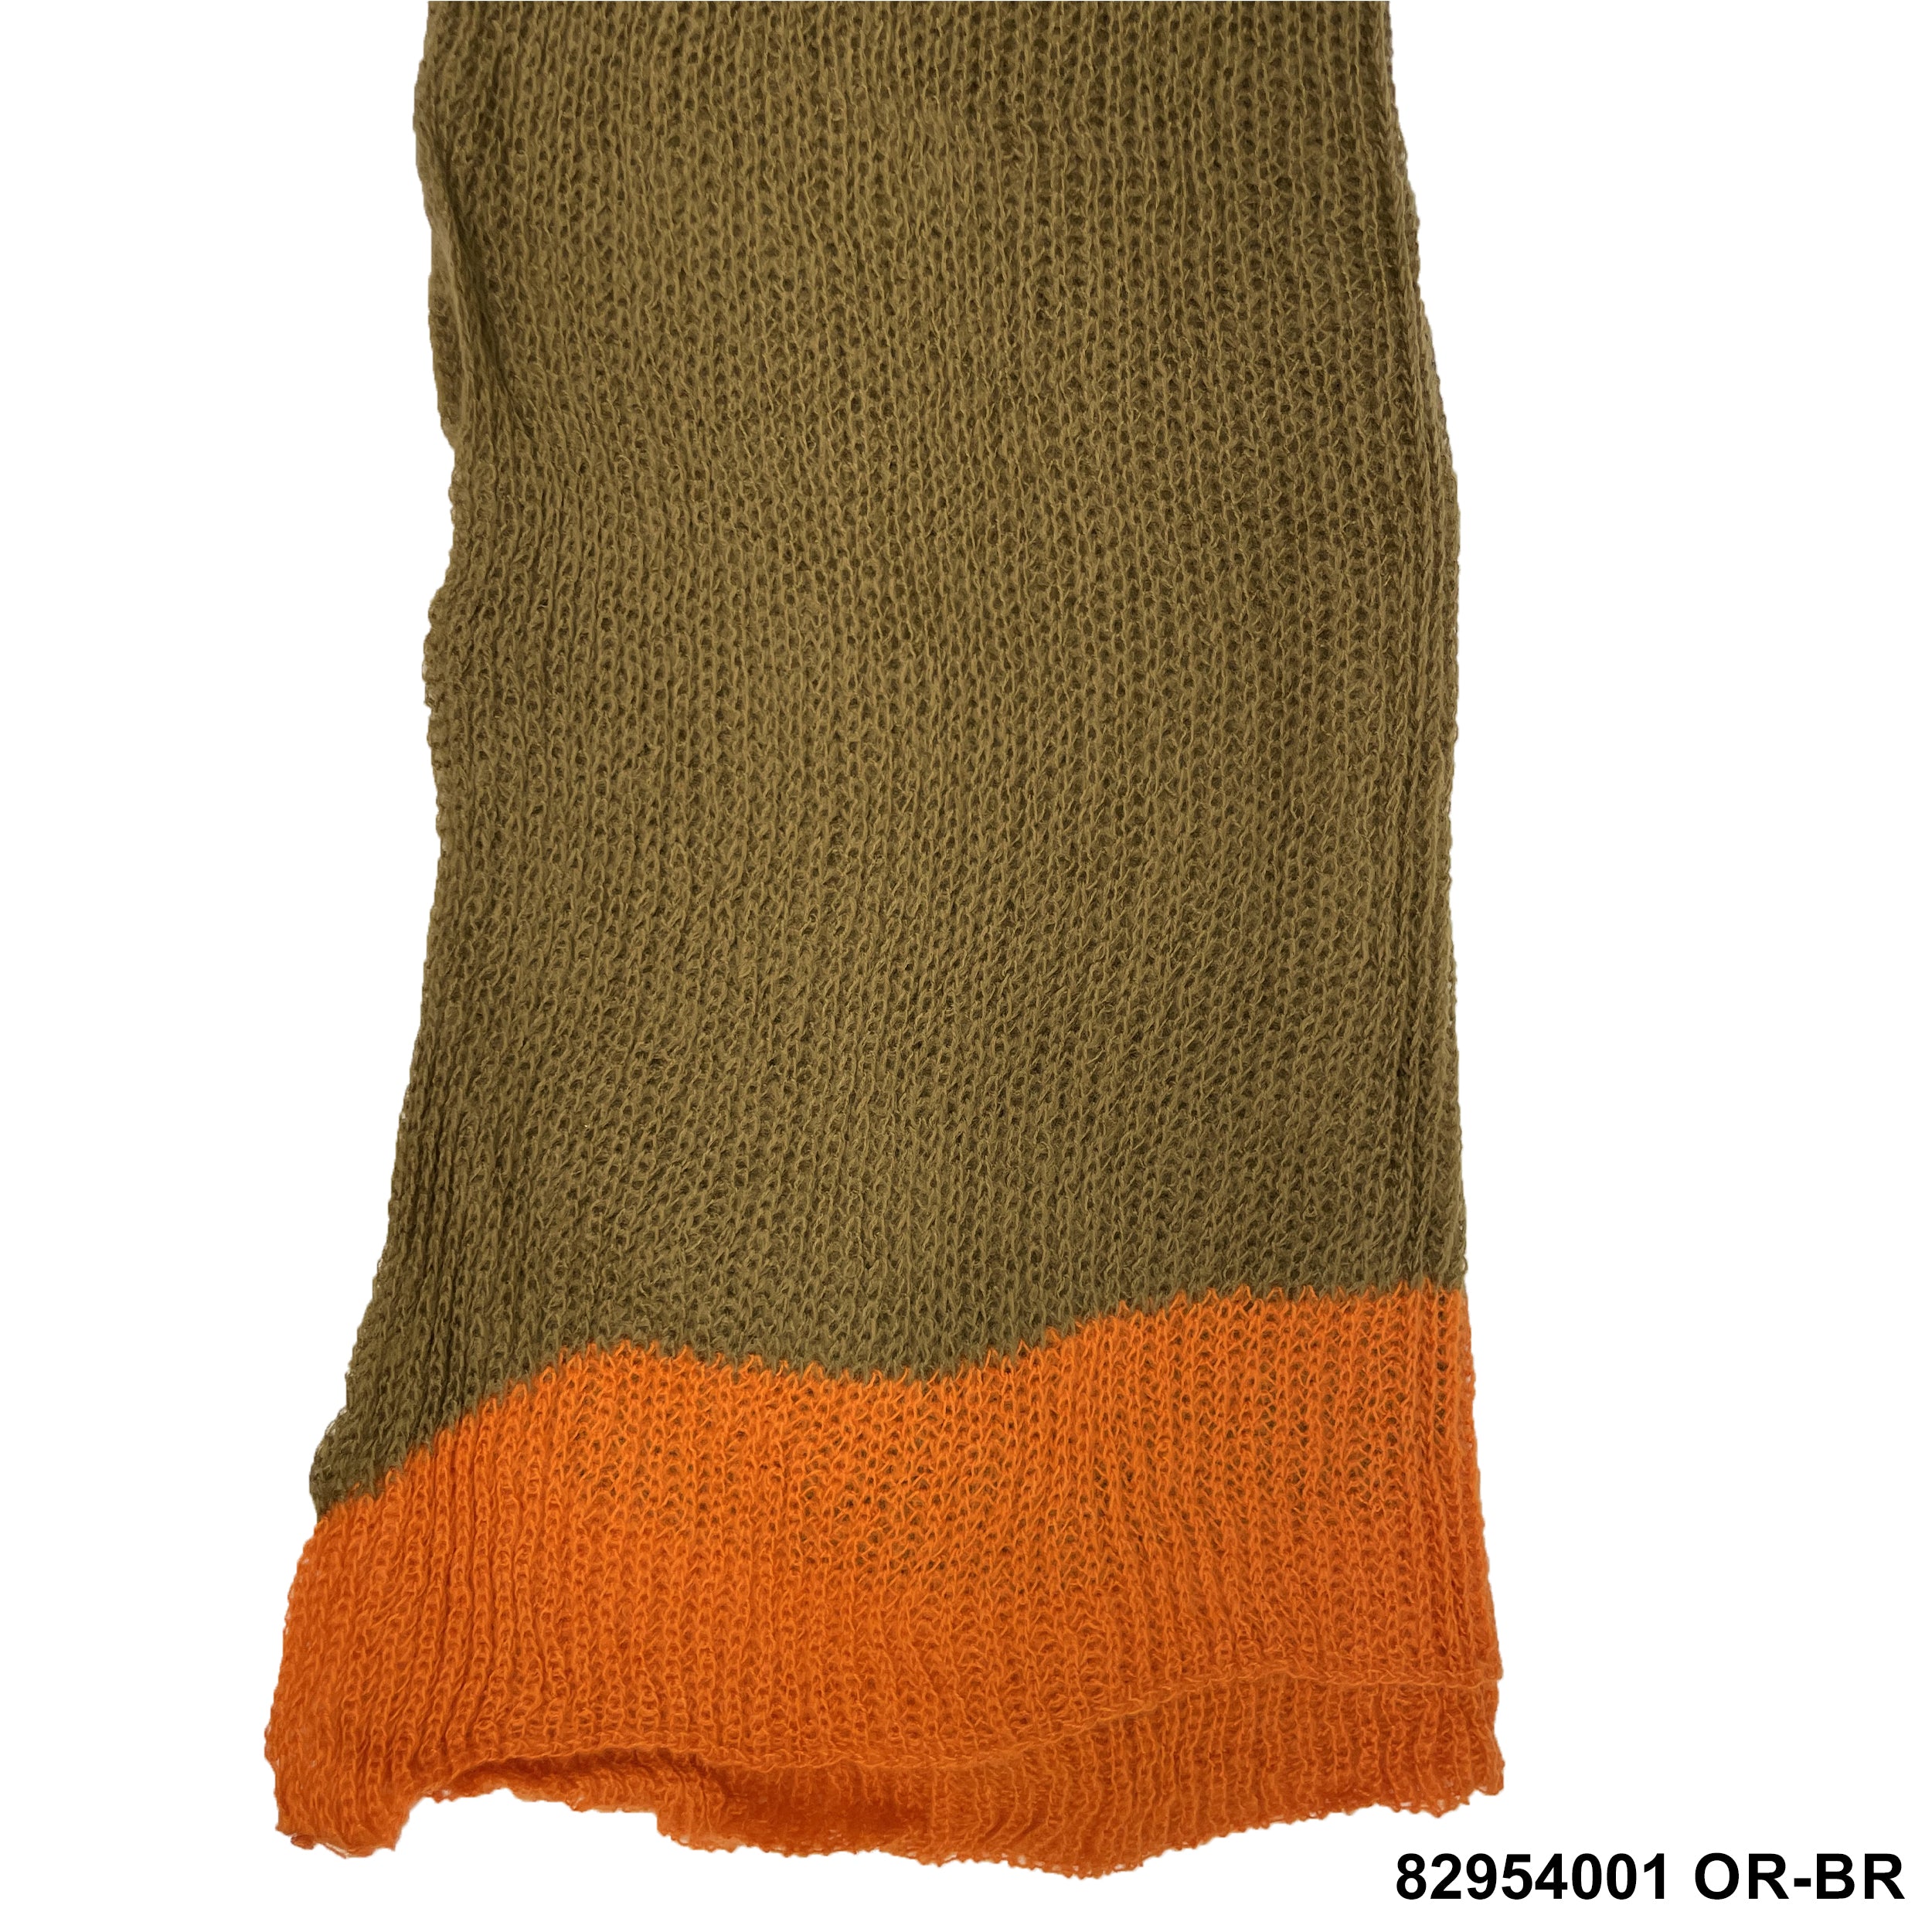 Warm Knitted Shawls 82954001 OR-BR